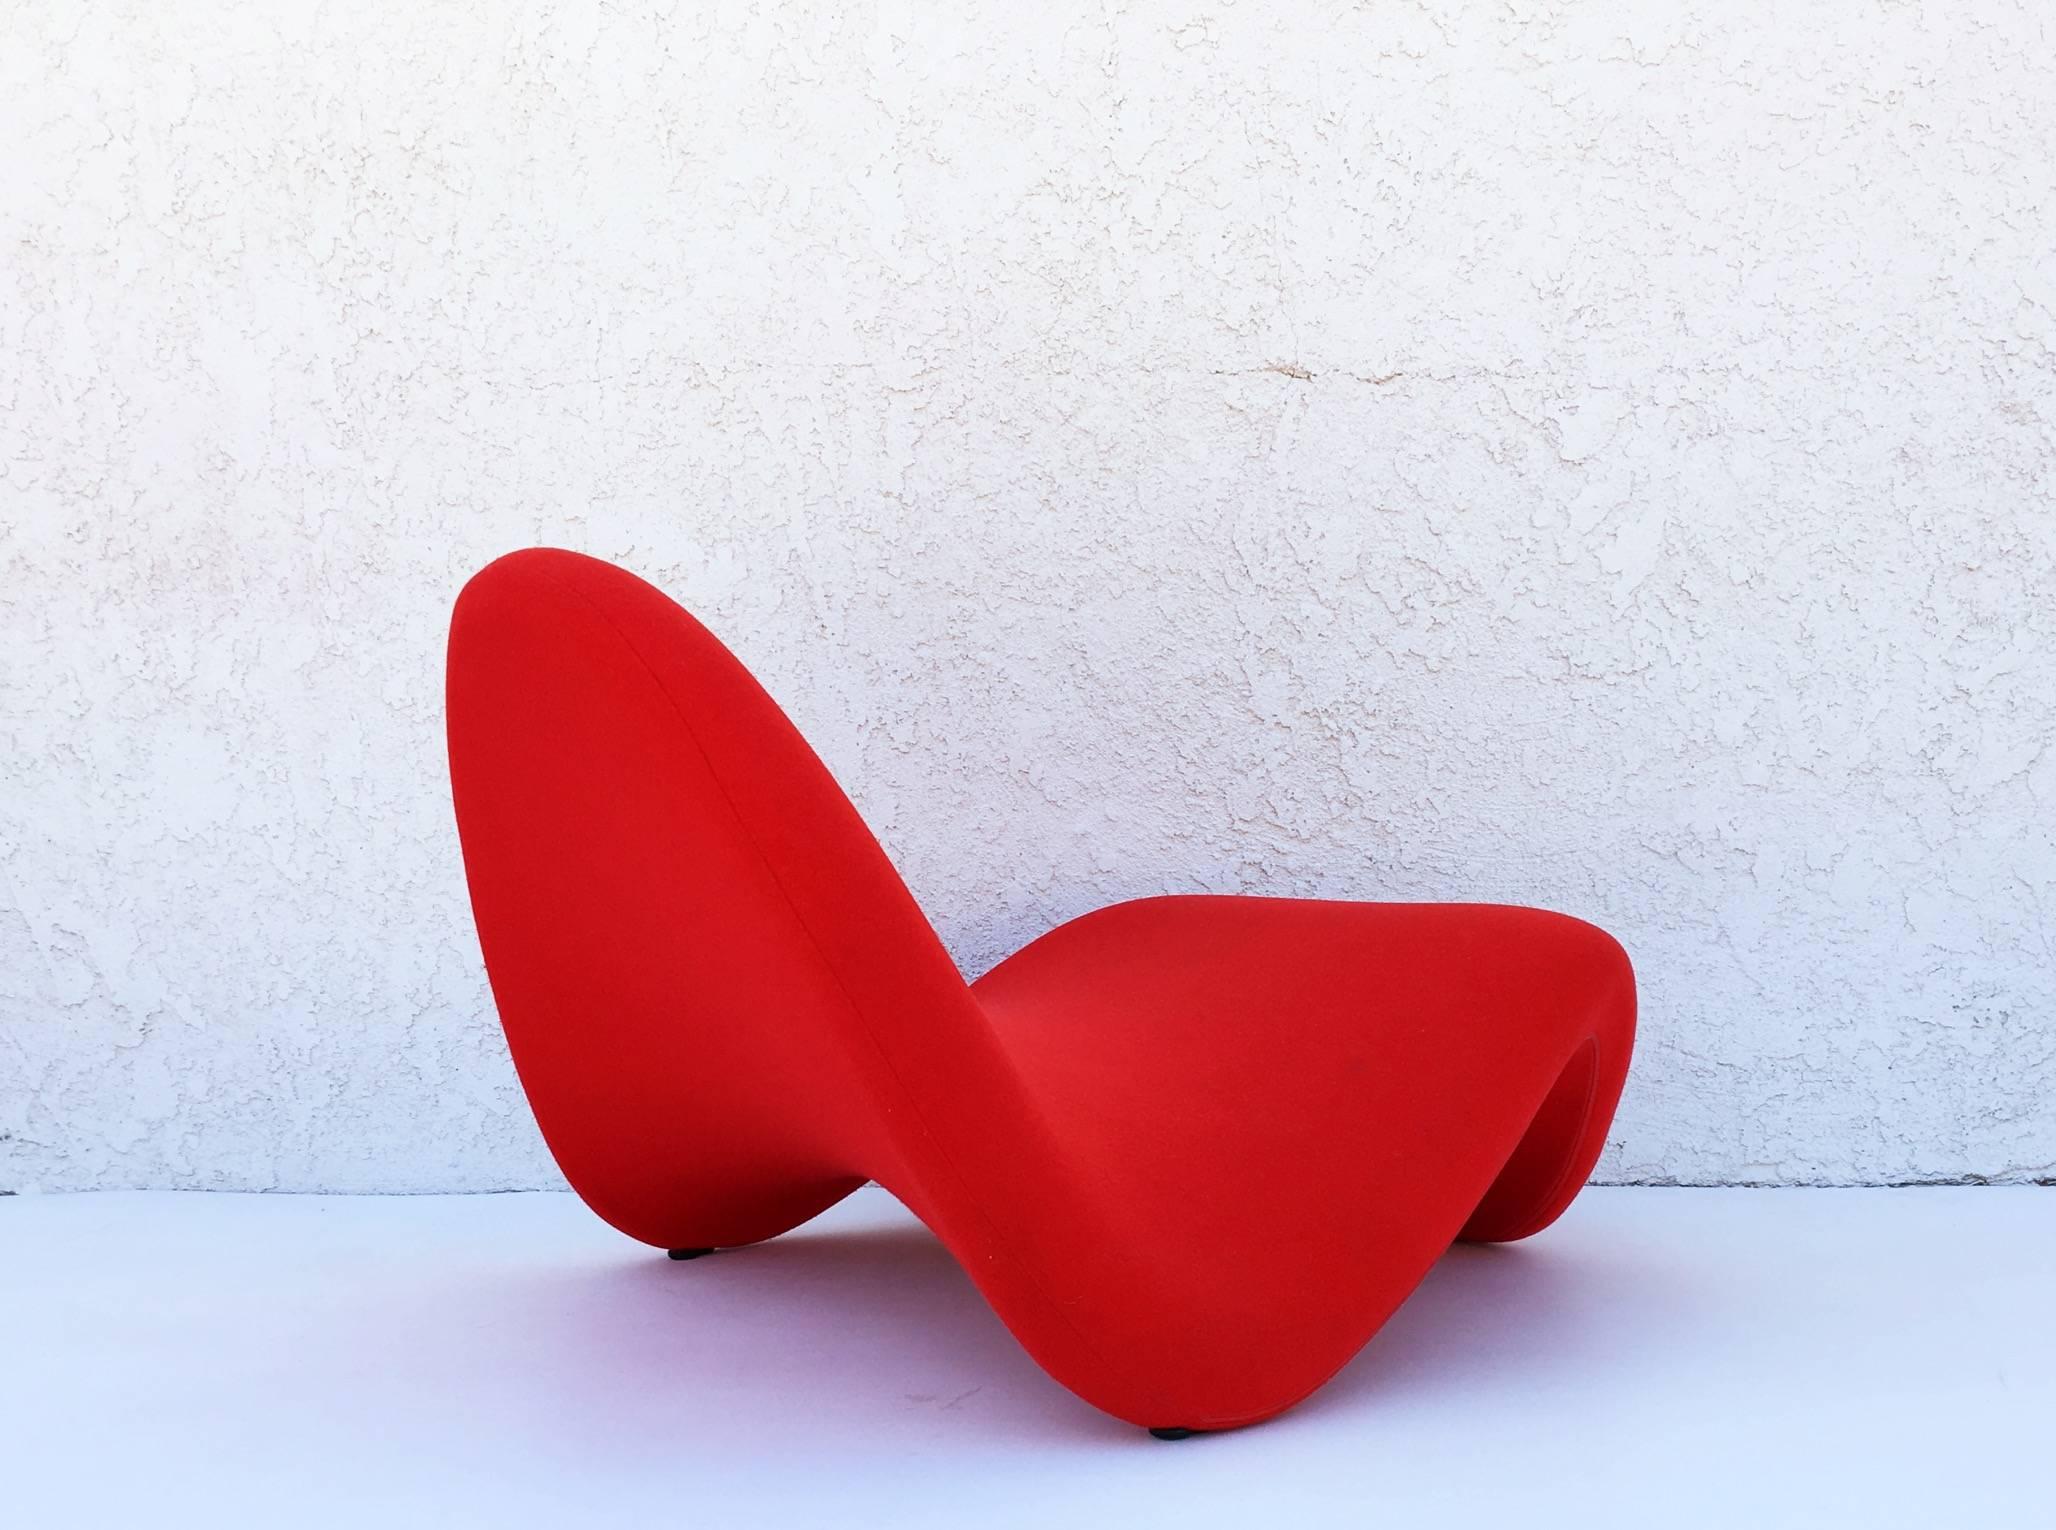 A beautiful sculptural chaise longue chair designed by Pierre Paulin for Artifort in the 1960s. A classic Mid-Century Modern lounge chair.
Made out of foamed with a tubular steel frame that is upholstered in a red wool fabric.